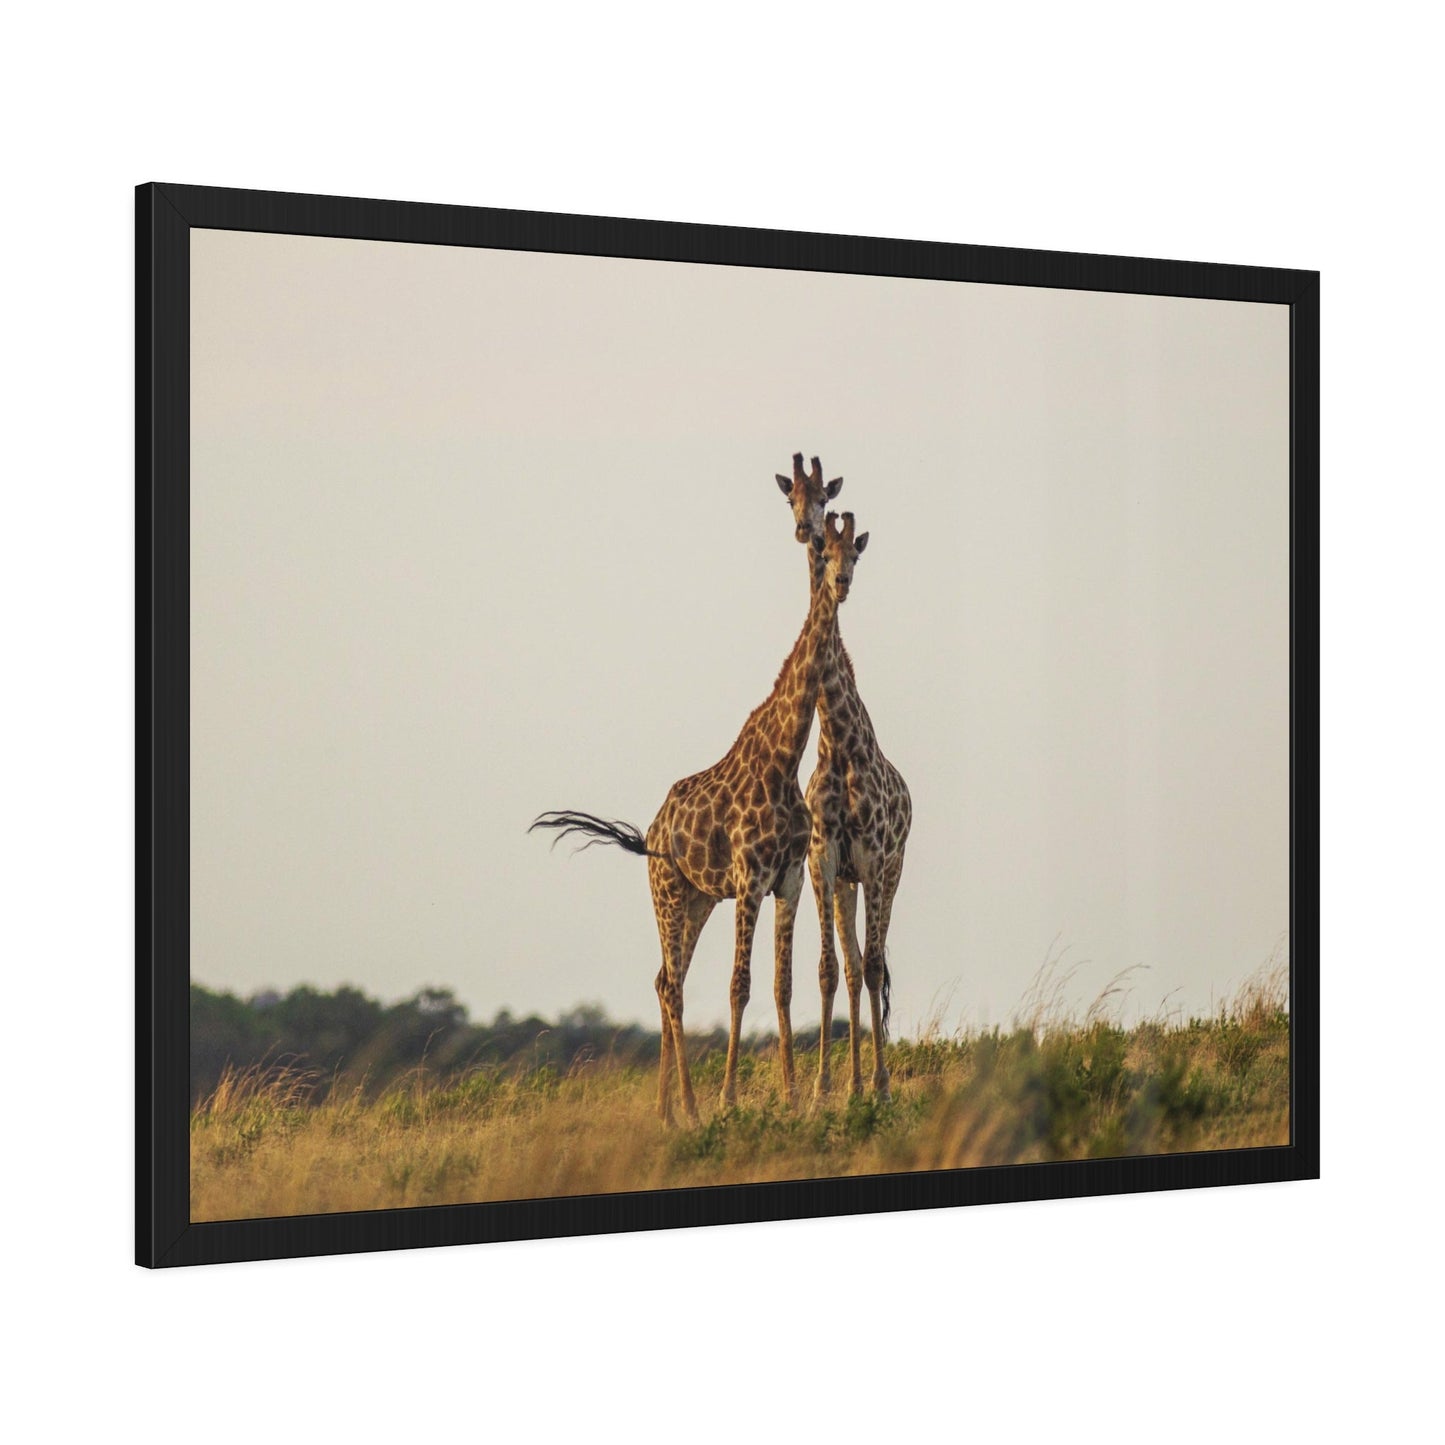 Giraffes in the Wild: Stunning Natural Canvas Print of Majestic Animals